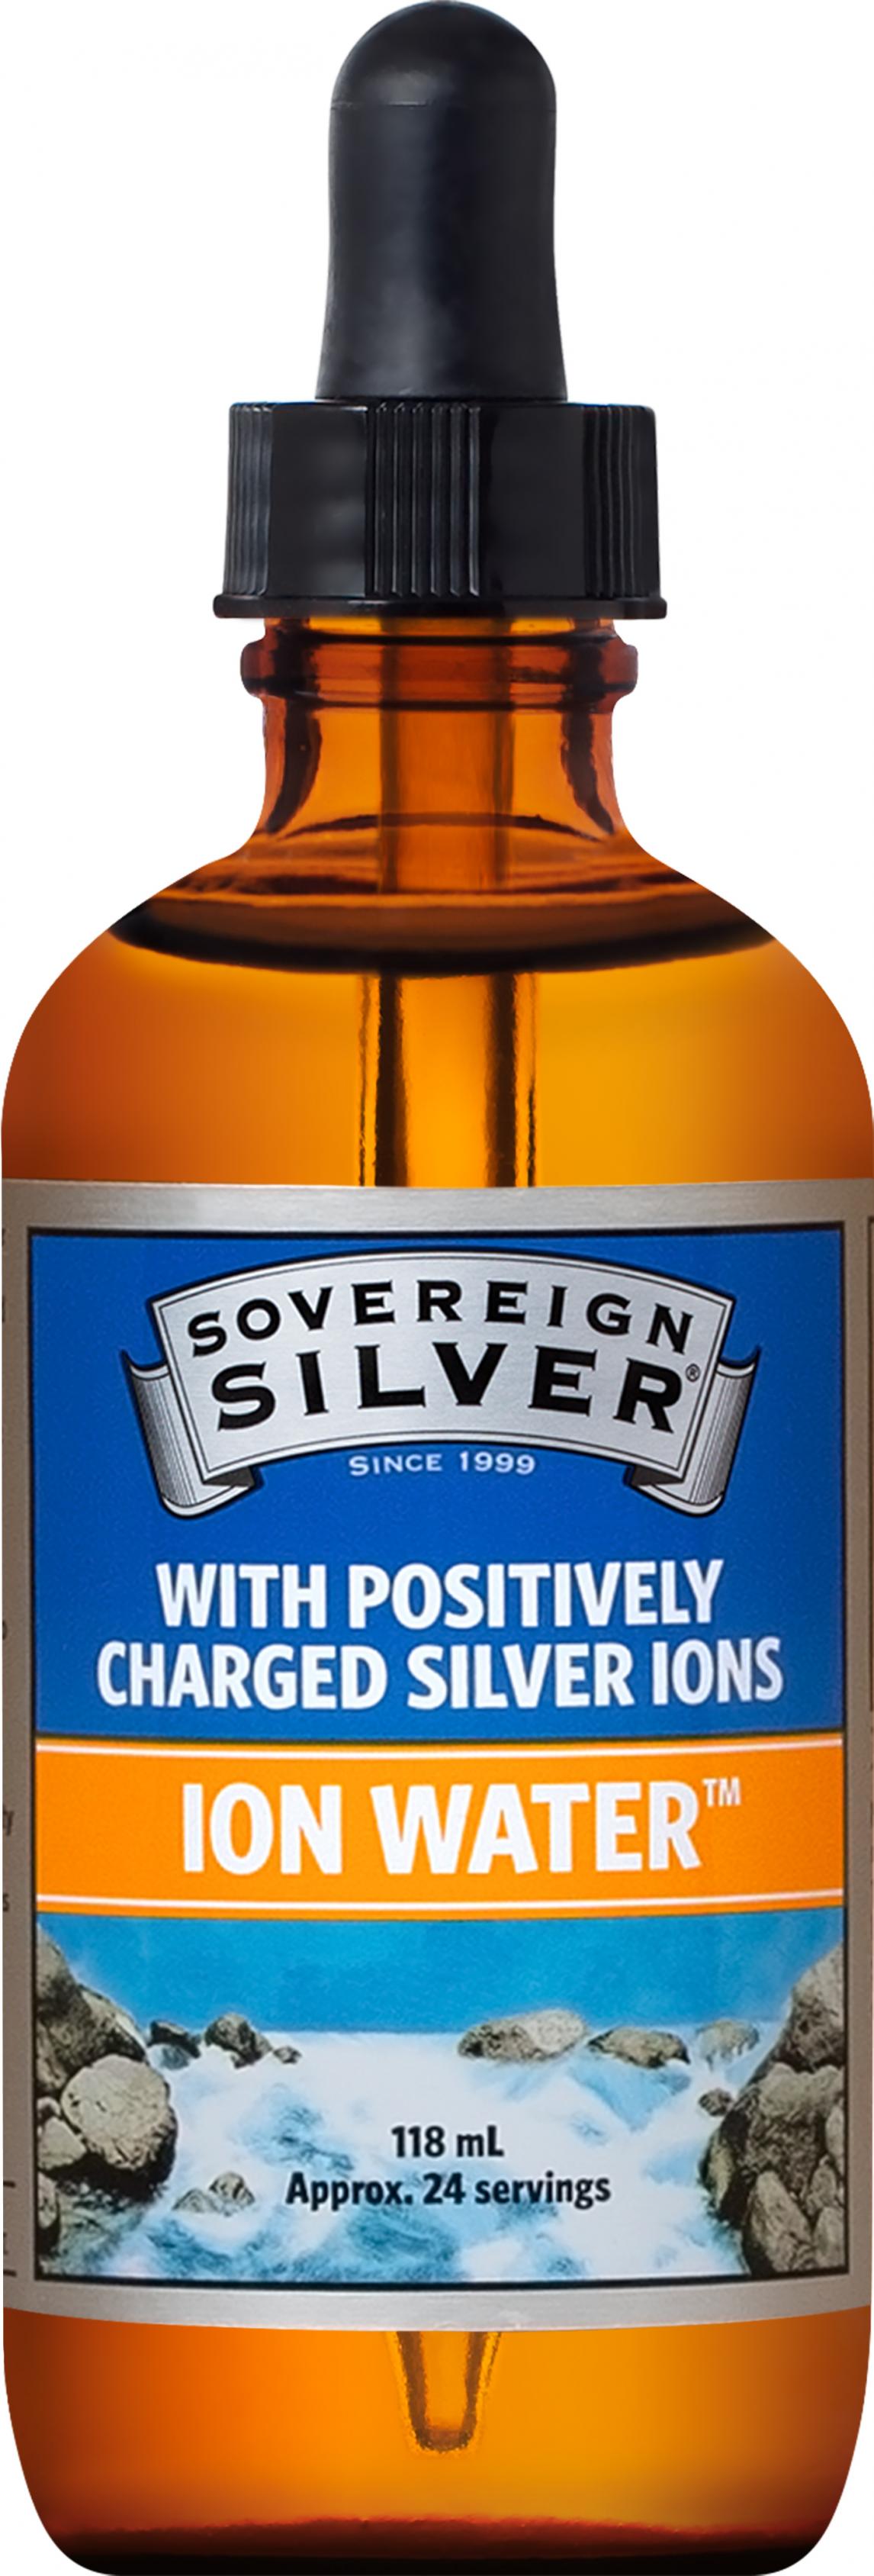 Sovereign Silver ION Water 118ml Dropper Top